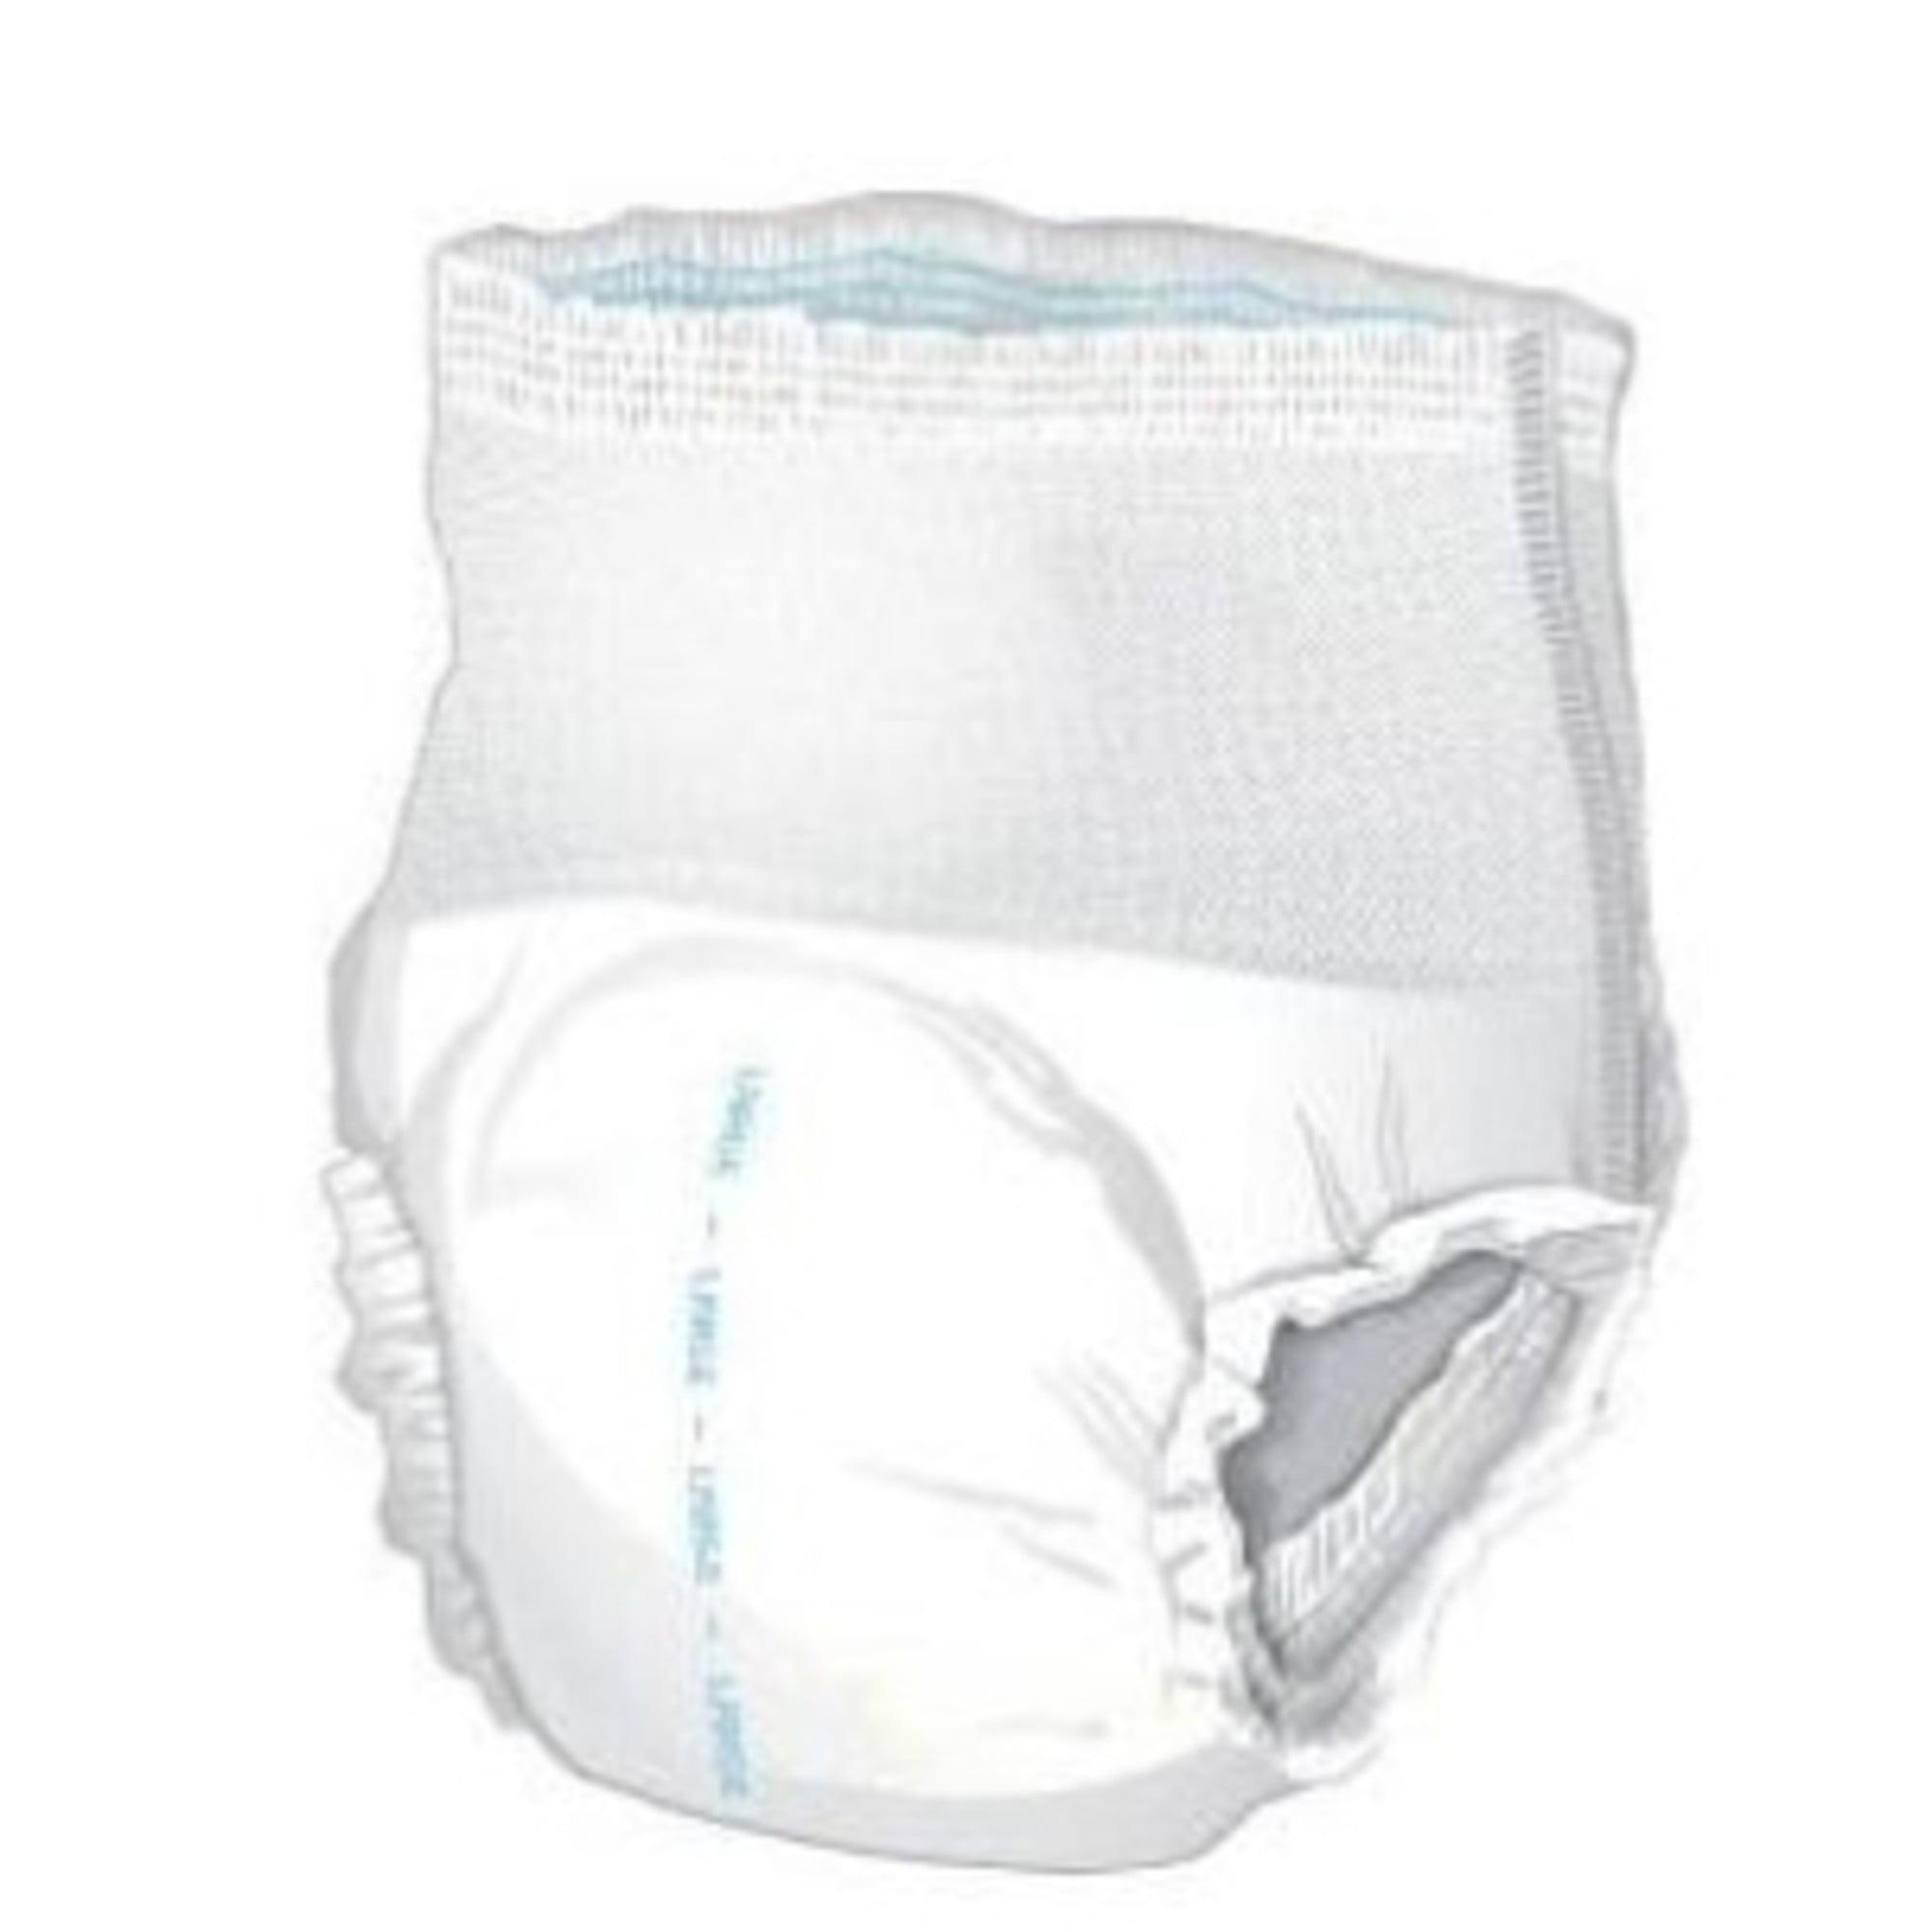  Women's Incontinence Panties Breathable Mesh Disposable  Underwear for Hospital C-Section Recovery Postpartum, 10pcs : Health &  Household